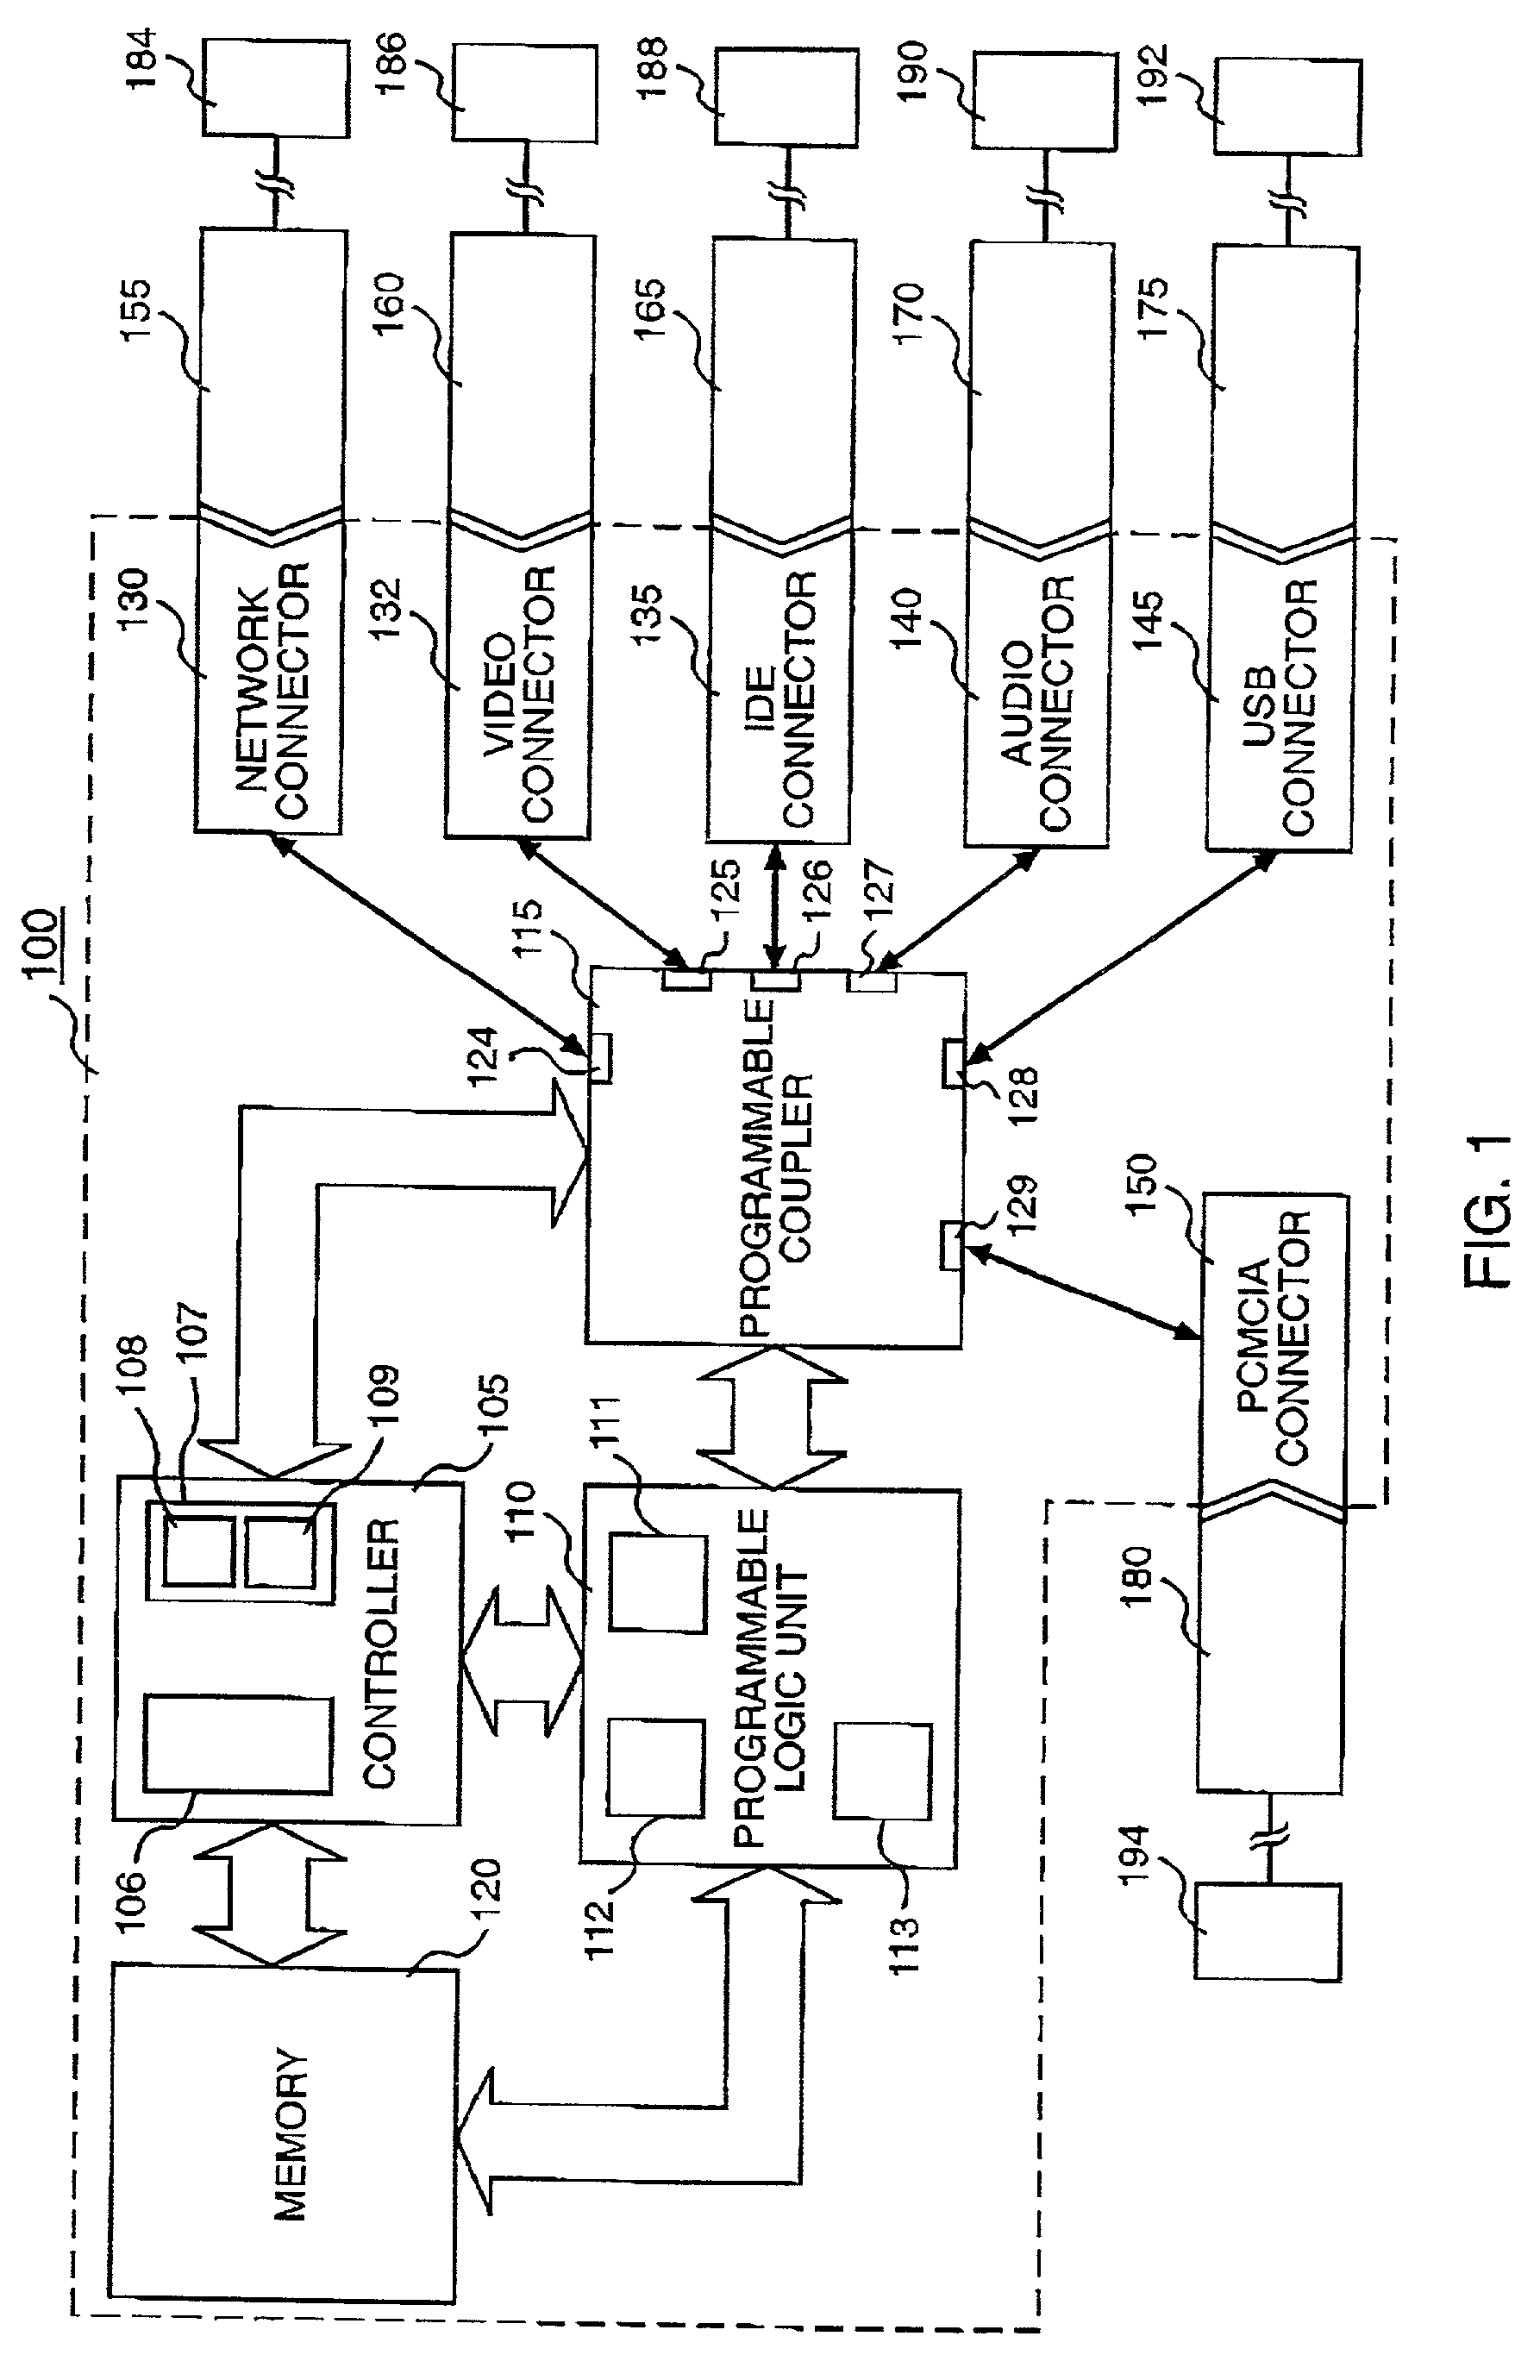 Reconfigurable communication interface and method therefor